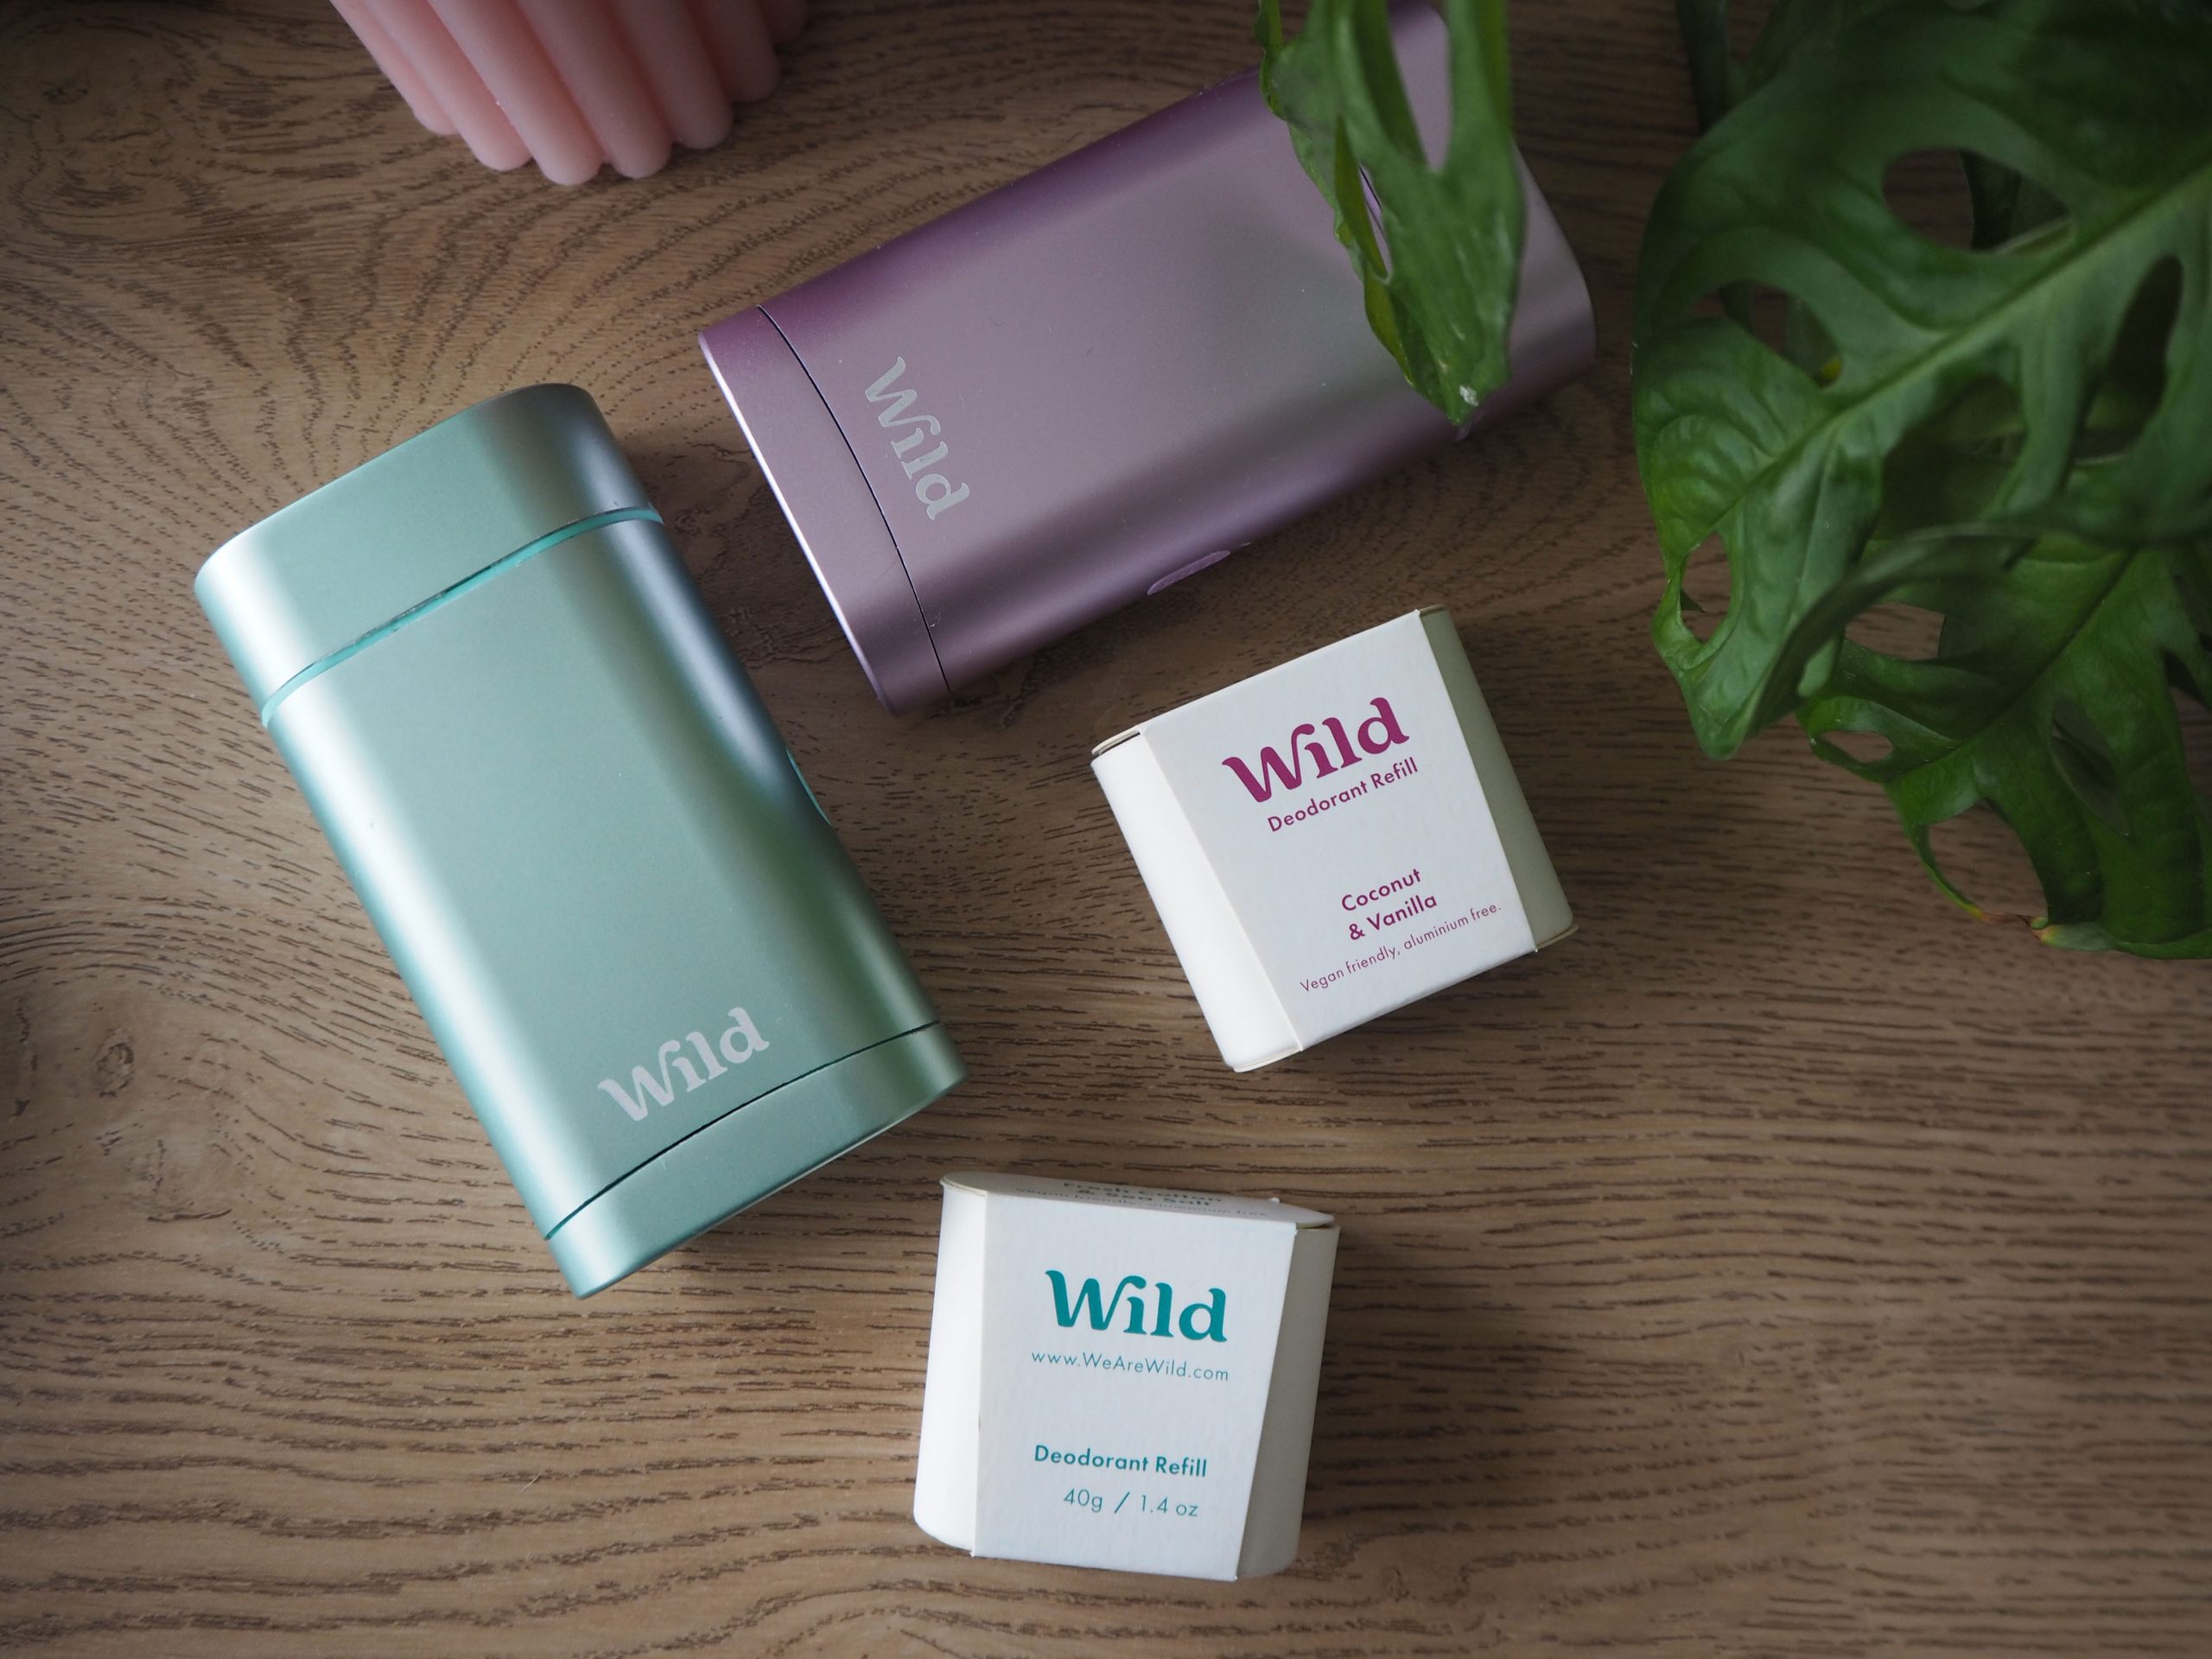 Reducing Plastic Waste with Eco-Friendly WILD Deodorant: A